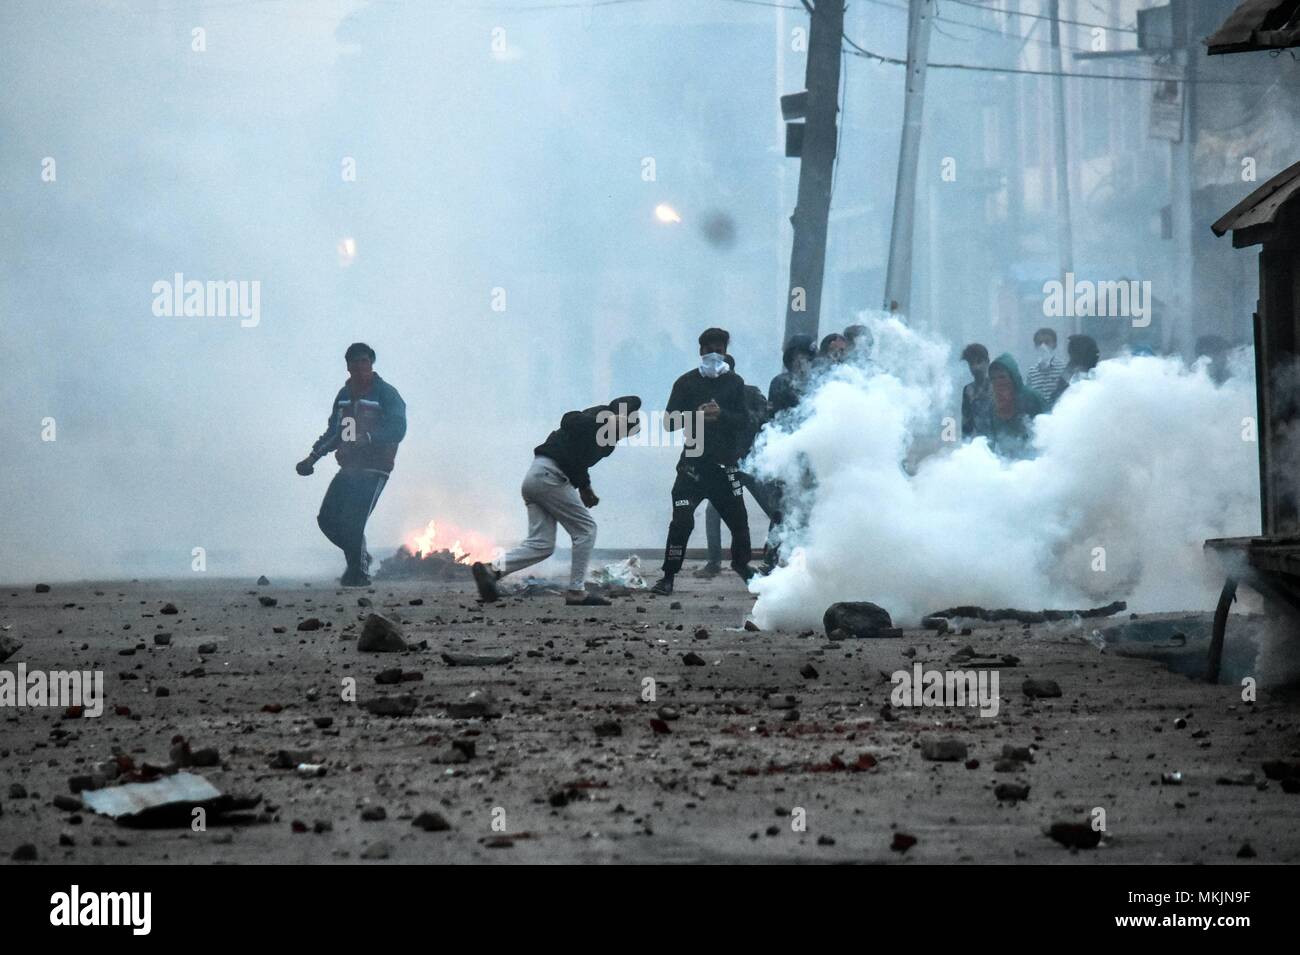 Srinagar, Kashmir. 8th May 2018. Kashmiri protesters throw stones amid tear smoke during clashes with government forces in Srinagar, Kashmir. Fierce clashes broke out between government forces and Kashmiri protesters in Srinagar on Tuesday as the valley continued to remain tense over the killing of 11 people including 5 militants and 6 civilians in Kashmir. Police used tear smoke shells and shot gun pellets to disperse hundreds of demonstrators who hurled rocks and chanted anti-and pro-freedom slogans. Credit: SOPA Images Limited/Alamy Live News Stock Photo